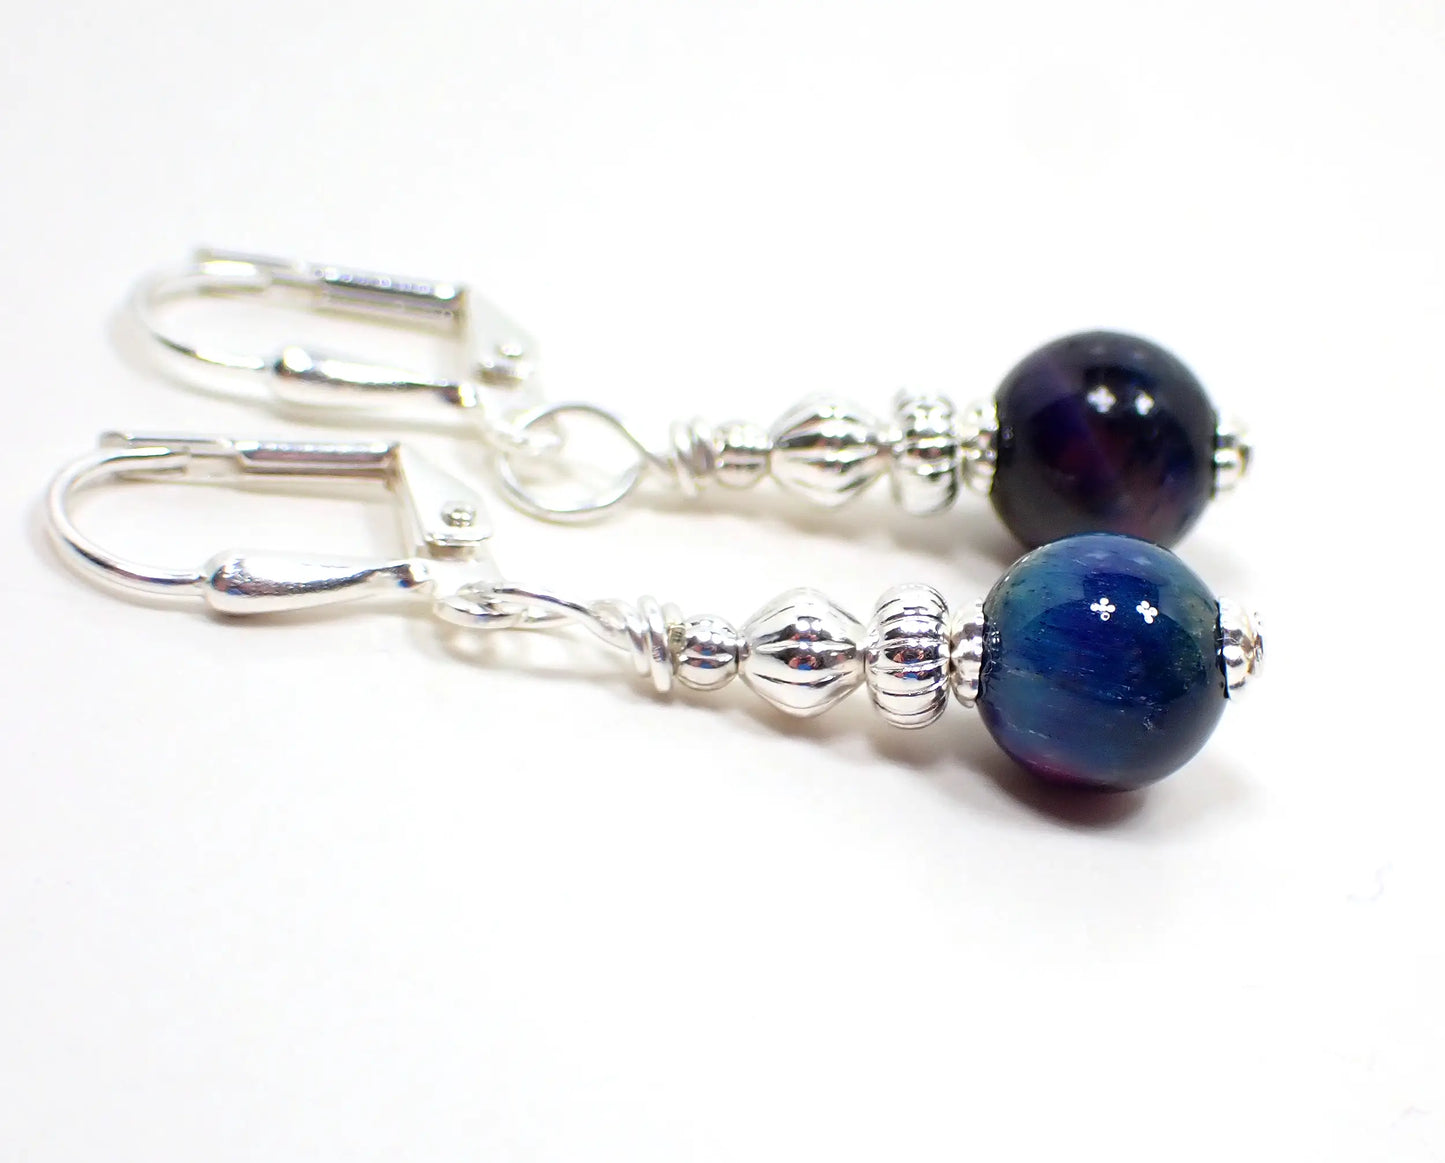 Small Blue Dyed Tiger's Eye Handmade Drop Earrings, Silver Plated Hook Lever Back or Clip On